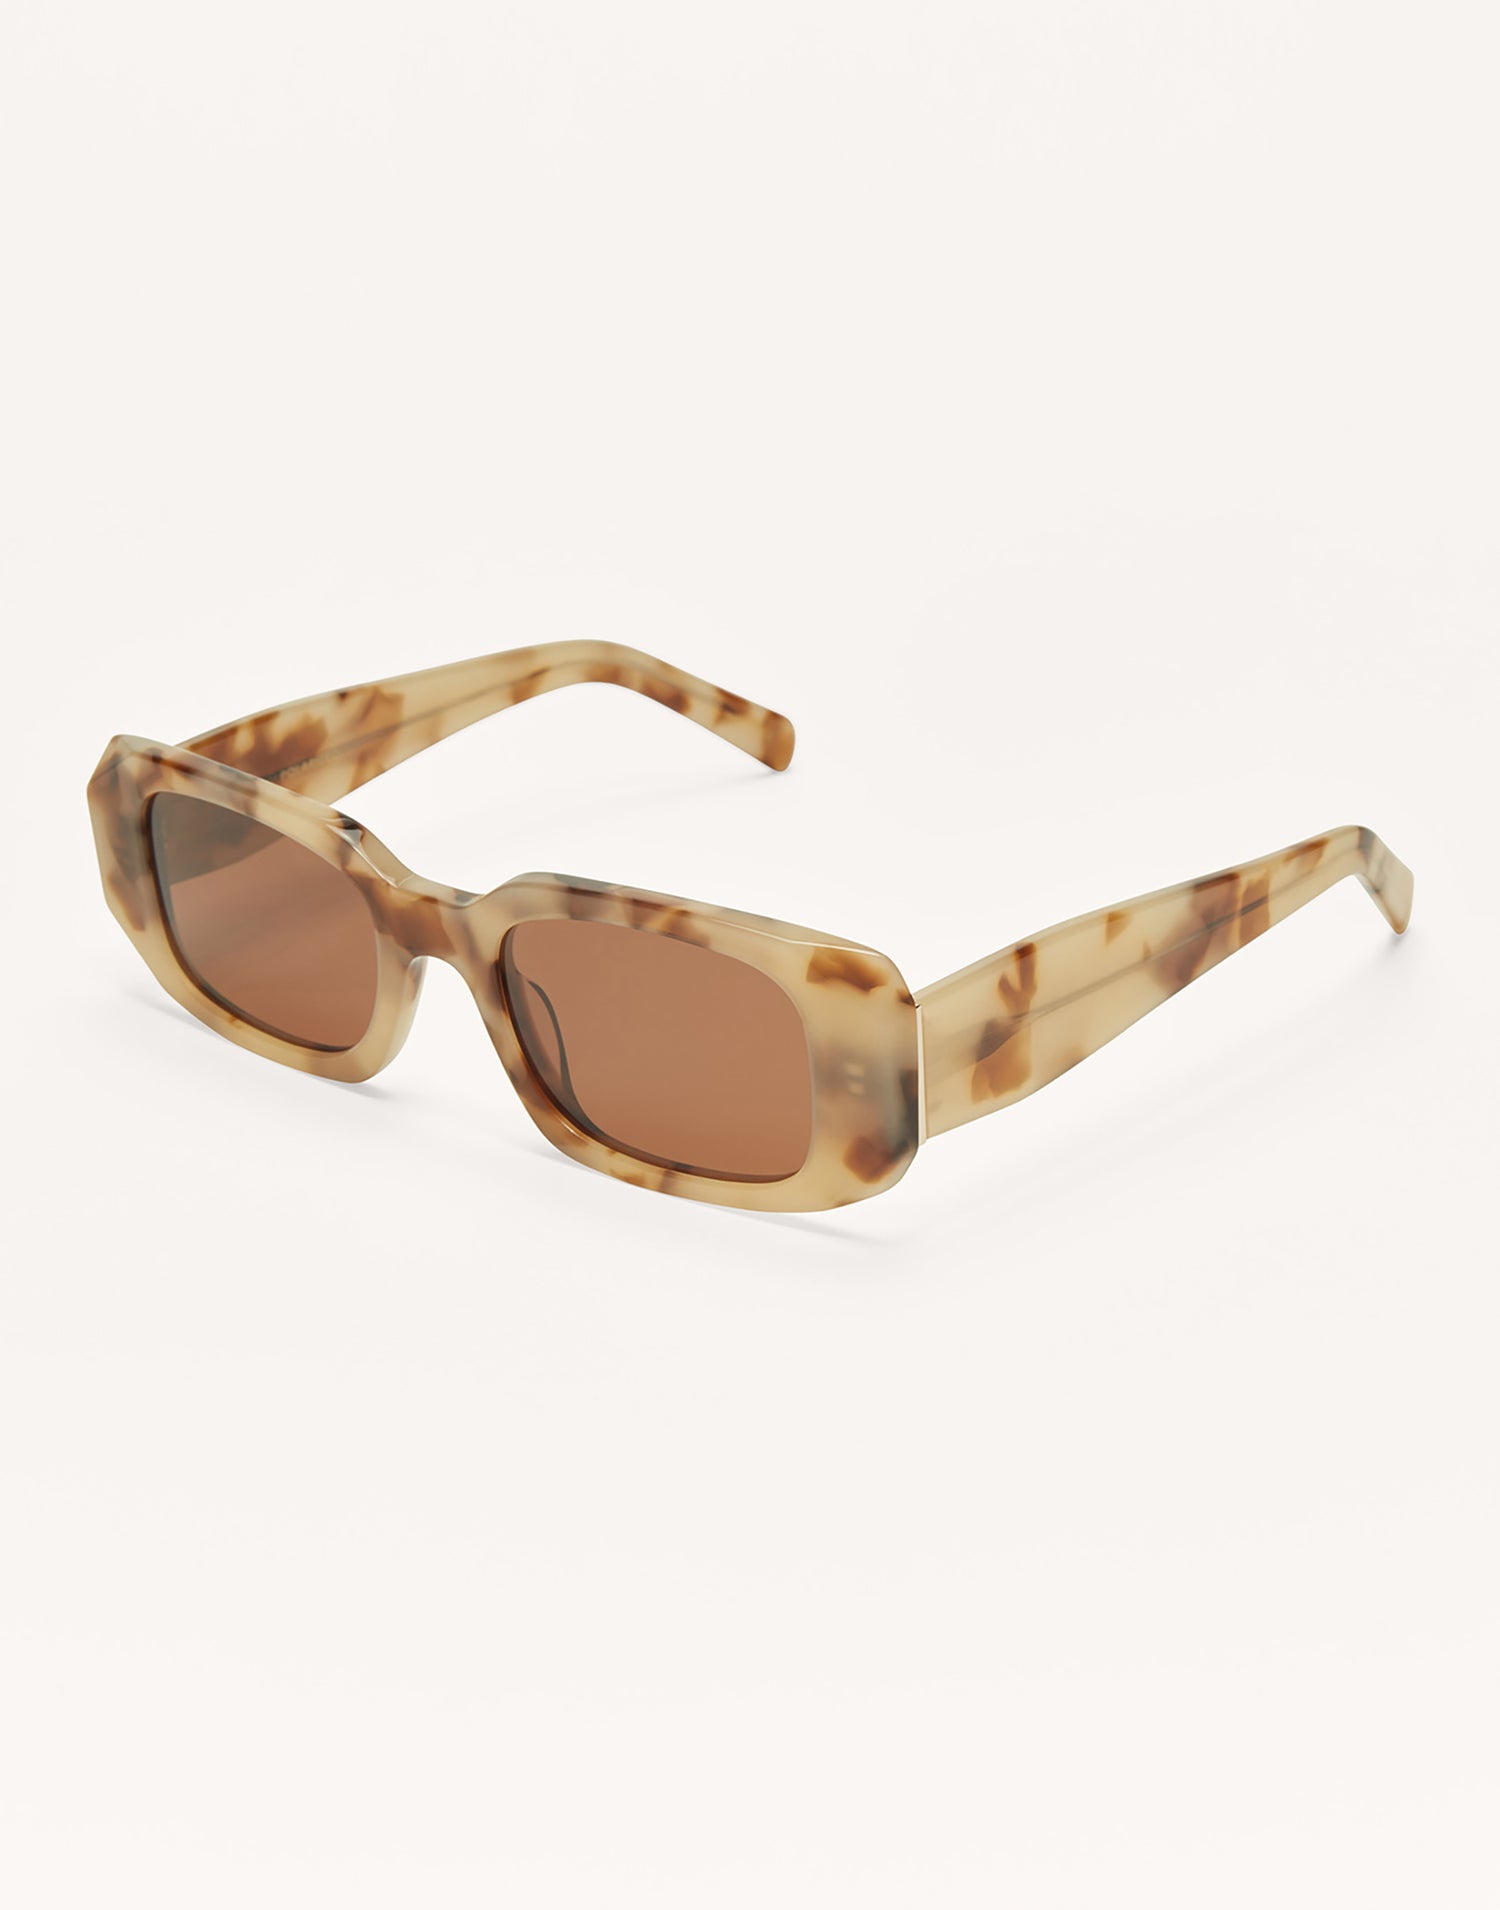 Off Duty Sunglasses by Z Supply in Blonde Tort - Angled View